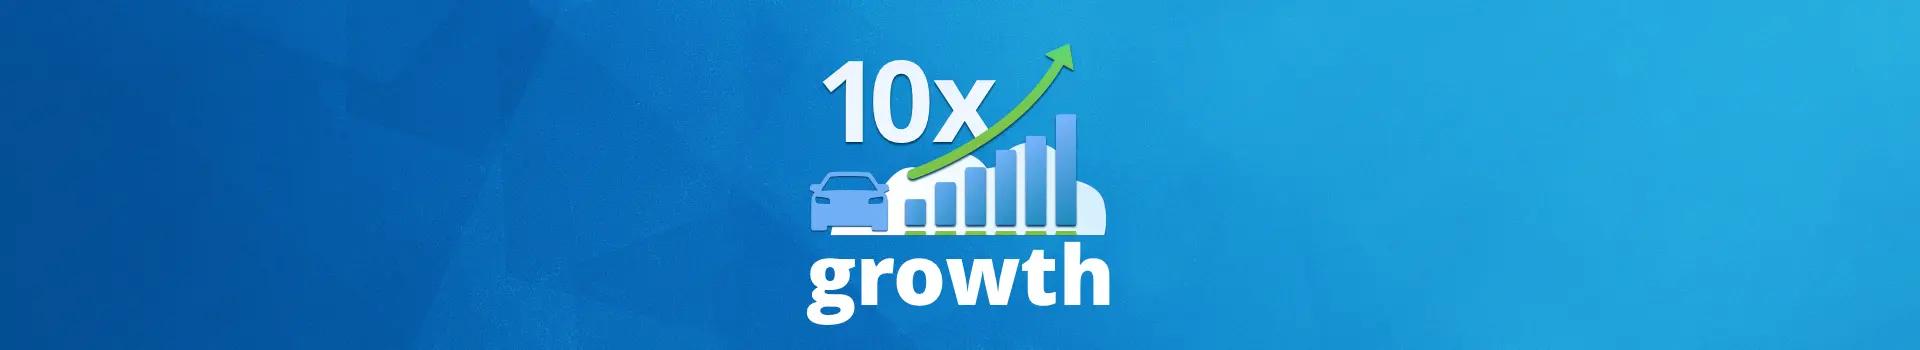 10x Growth at fleetster